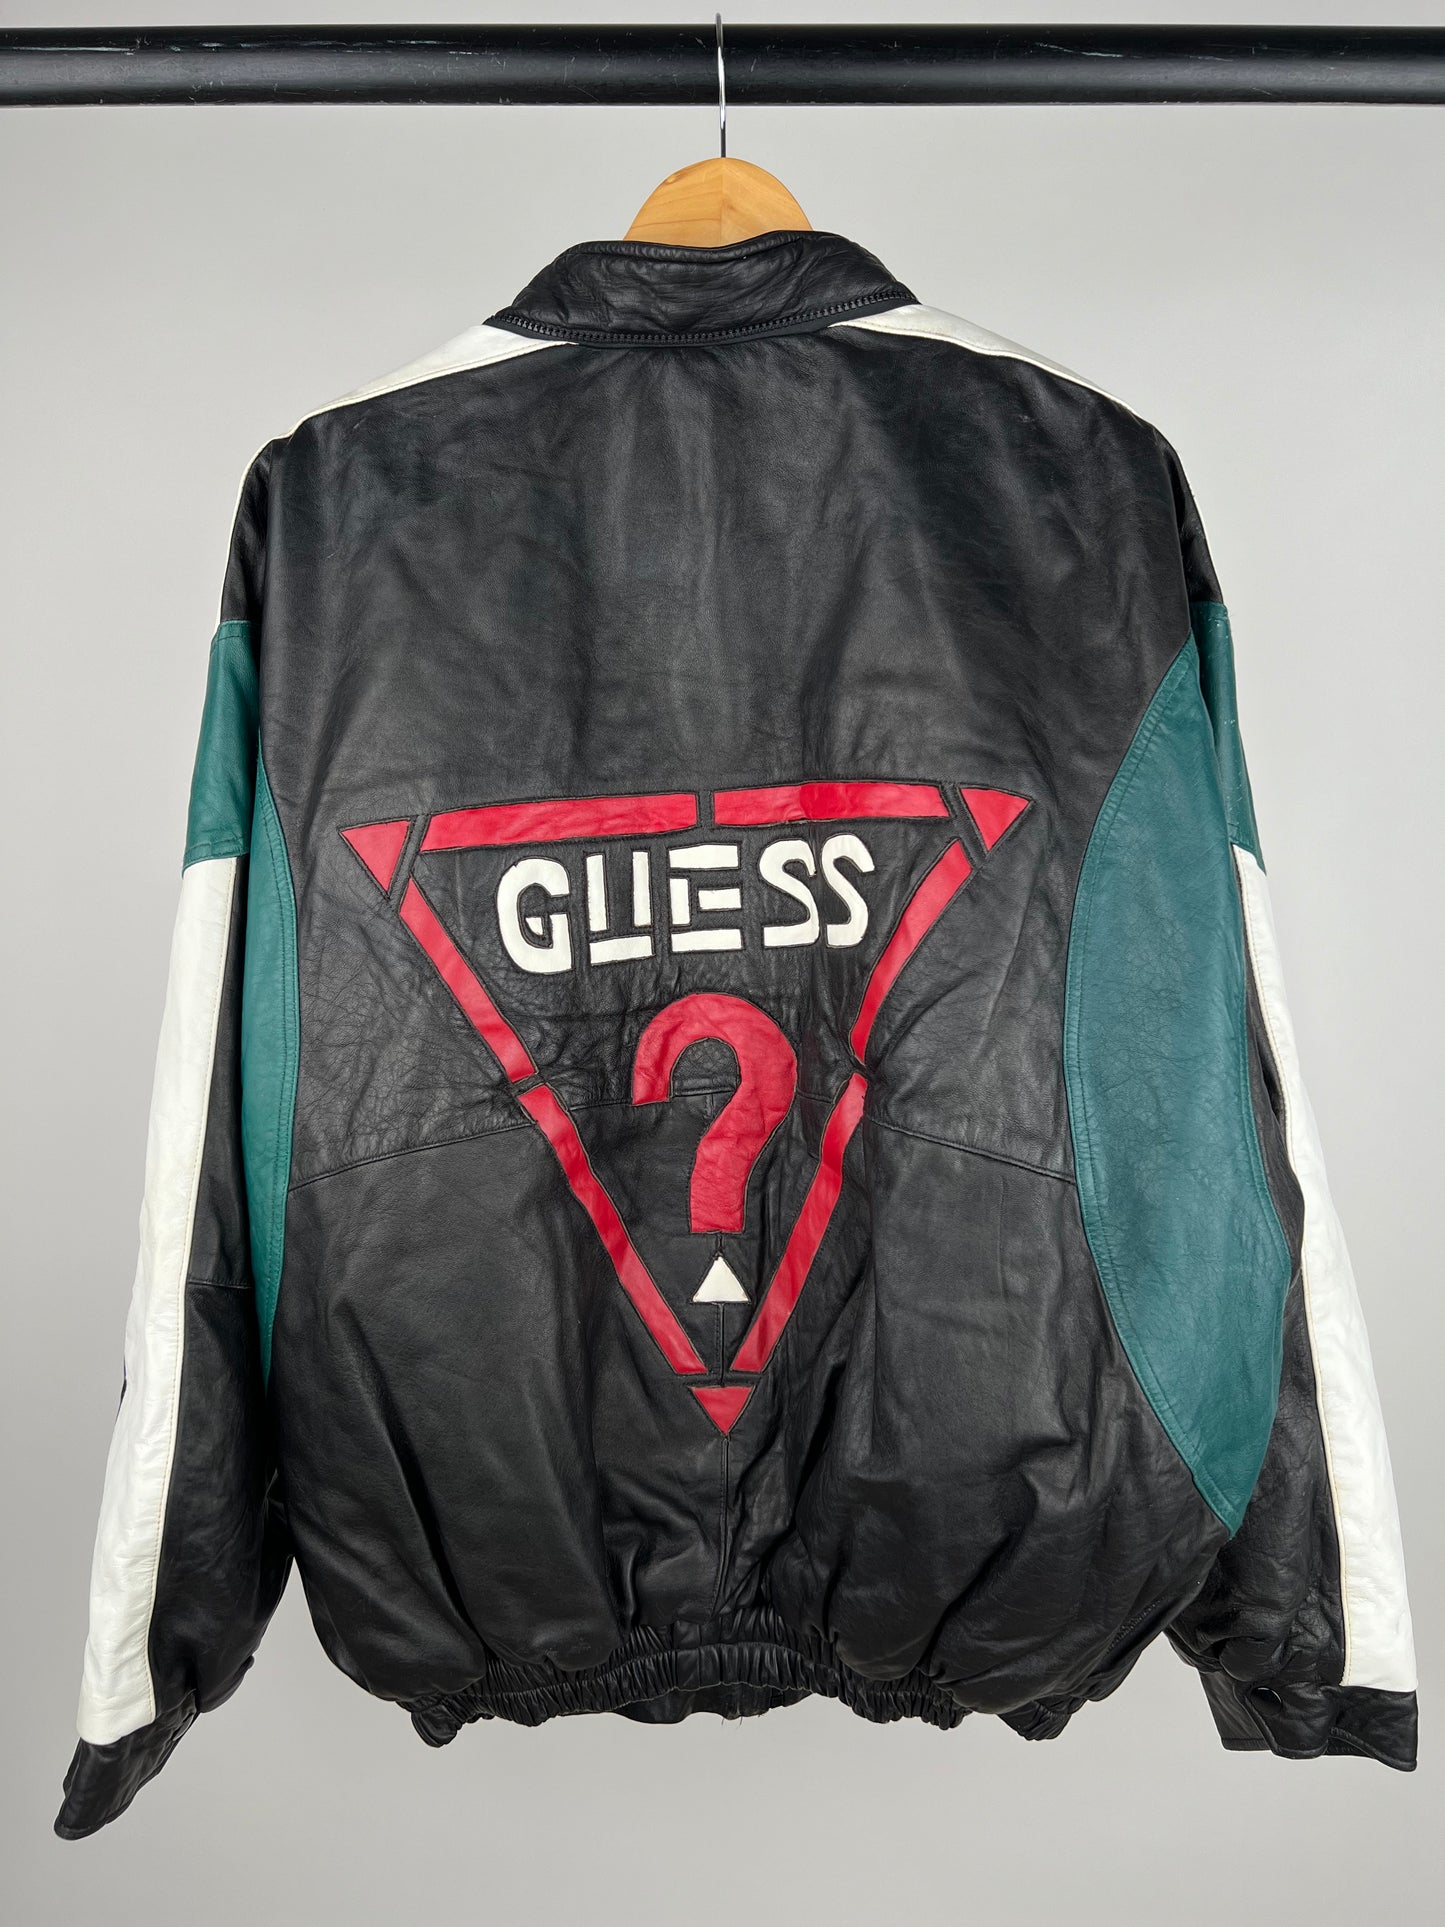 Vintage 90s Guess? Leather Bomber Jacket